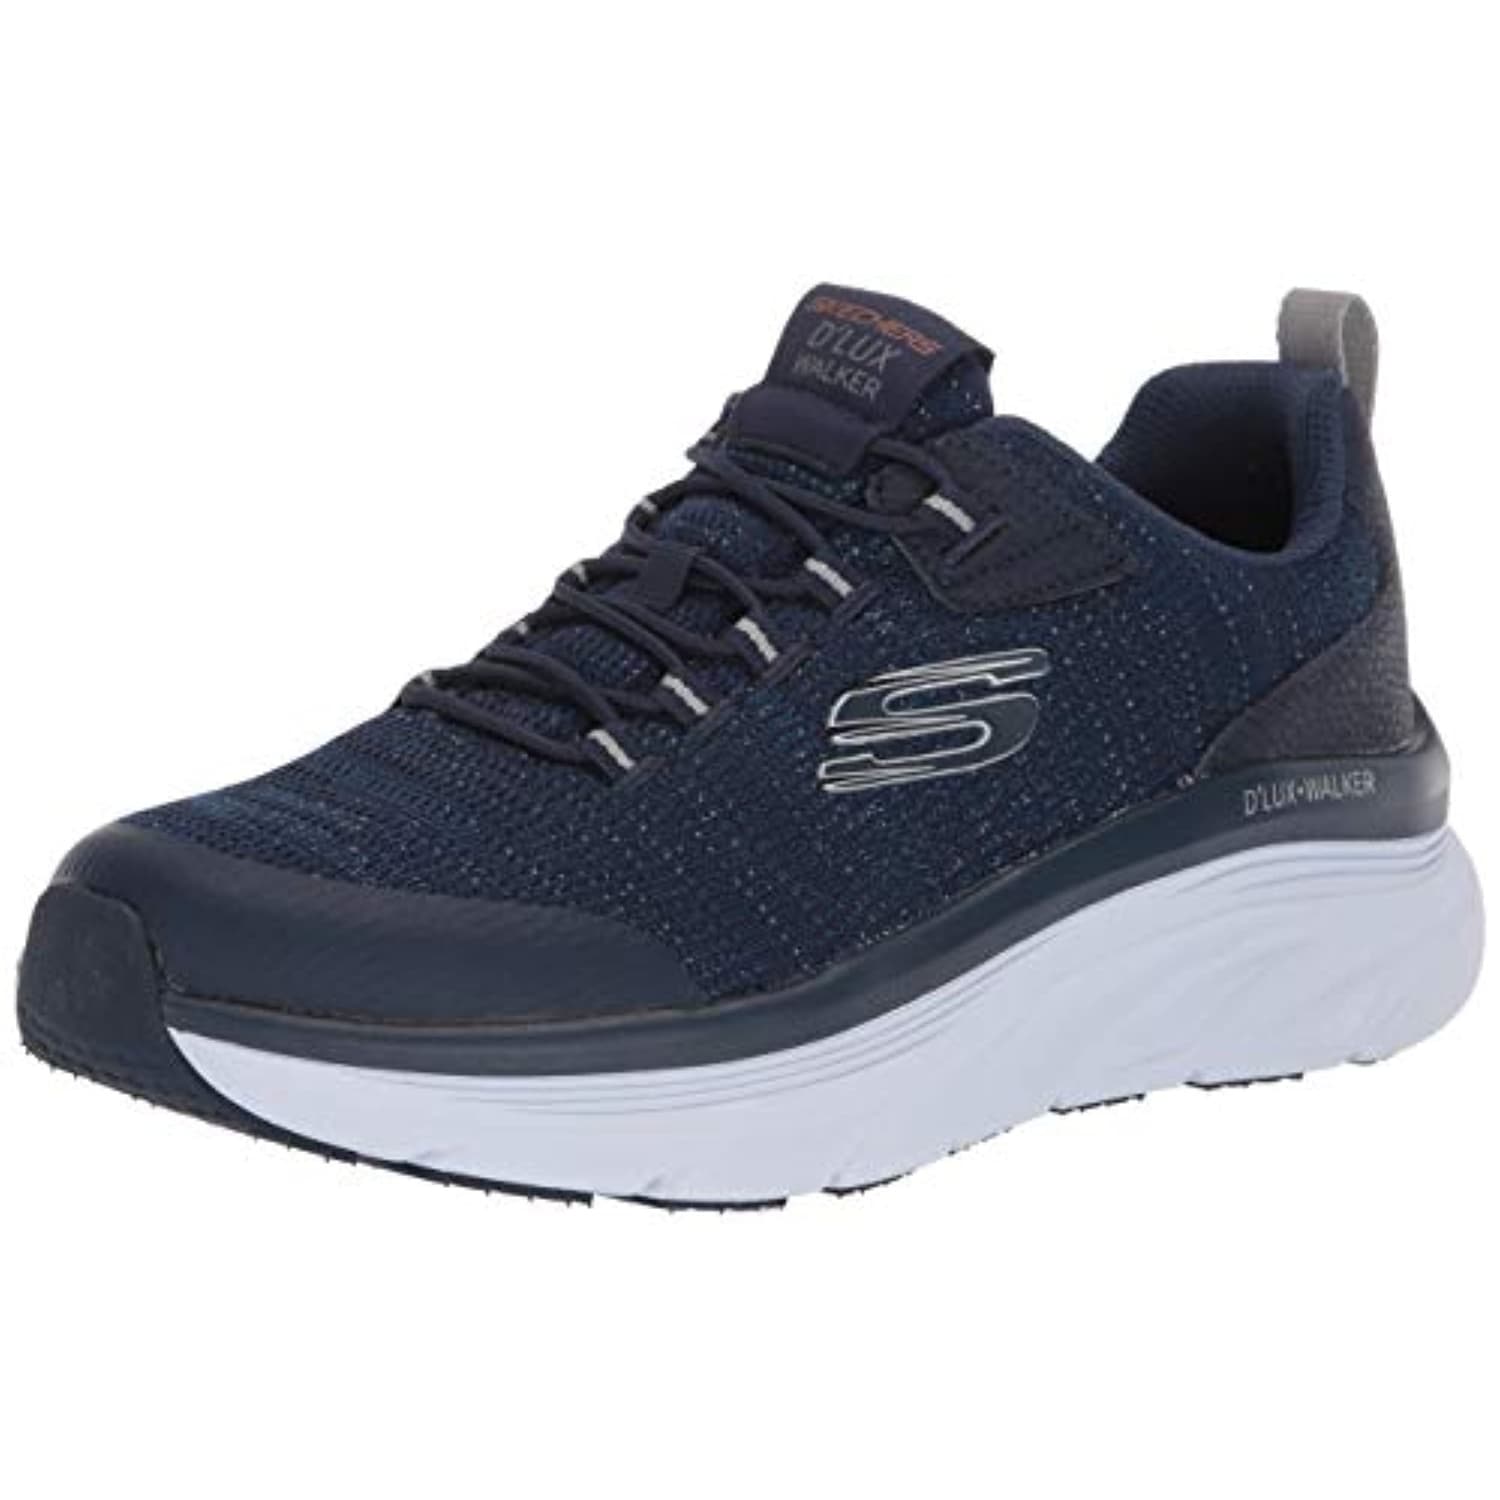 skechers men's on the go lux oxford